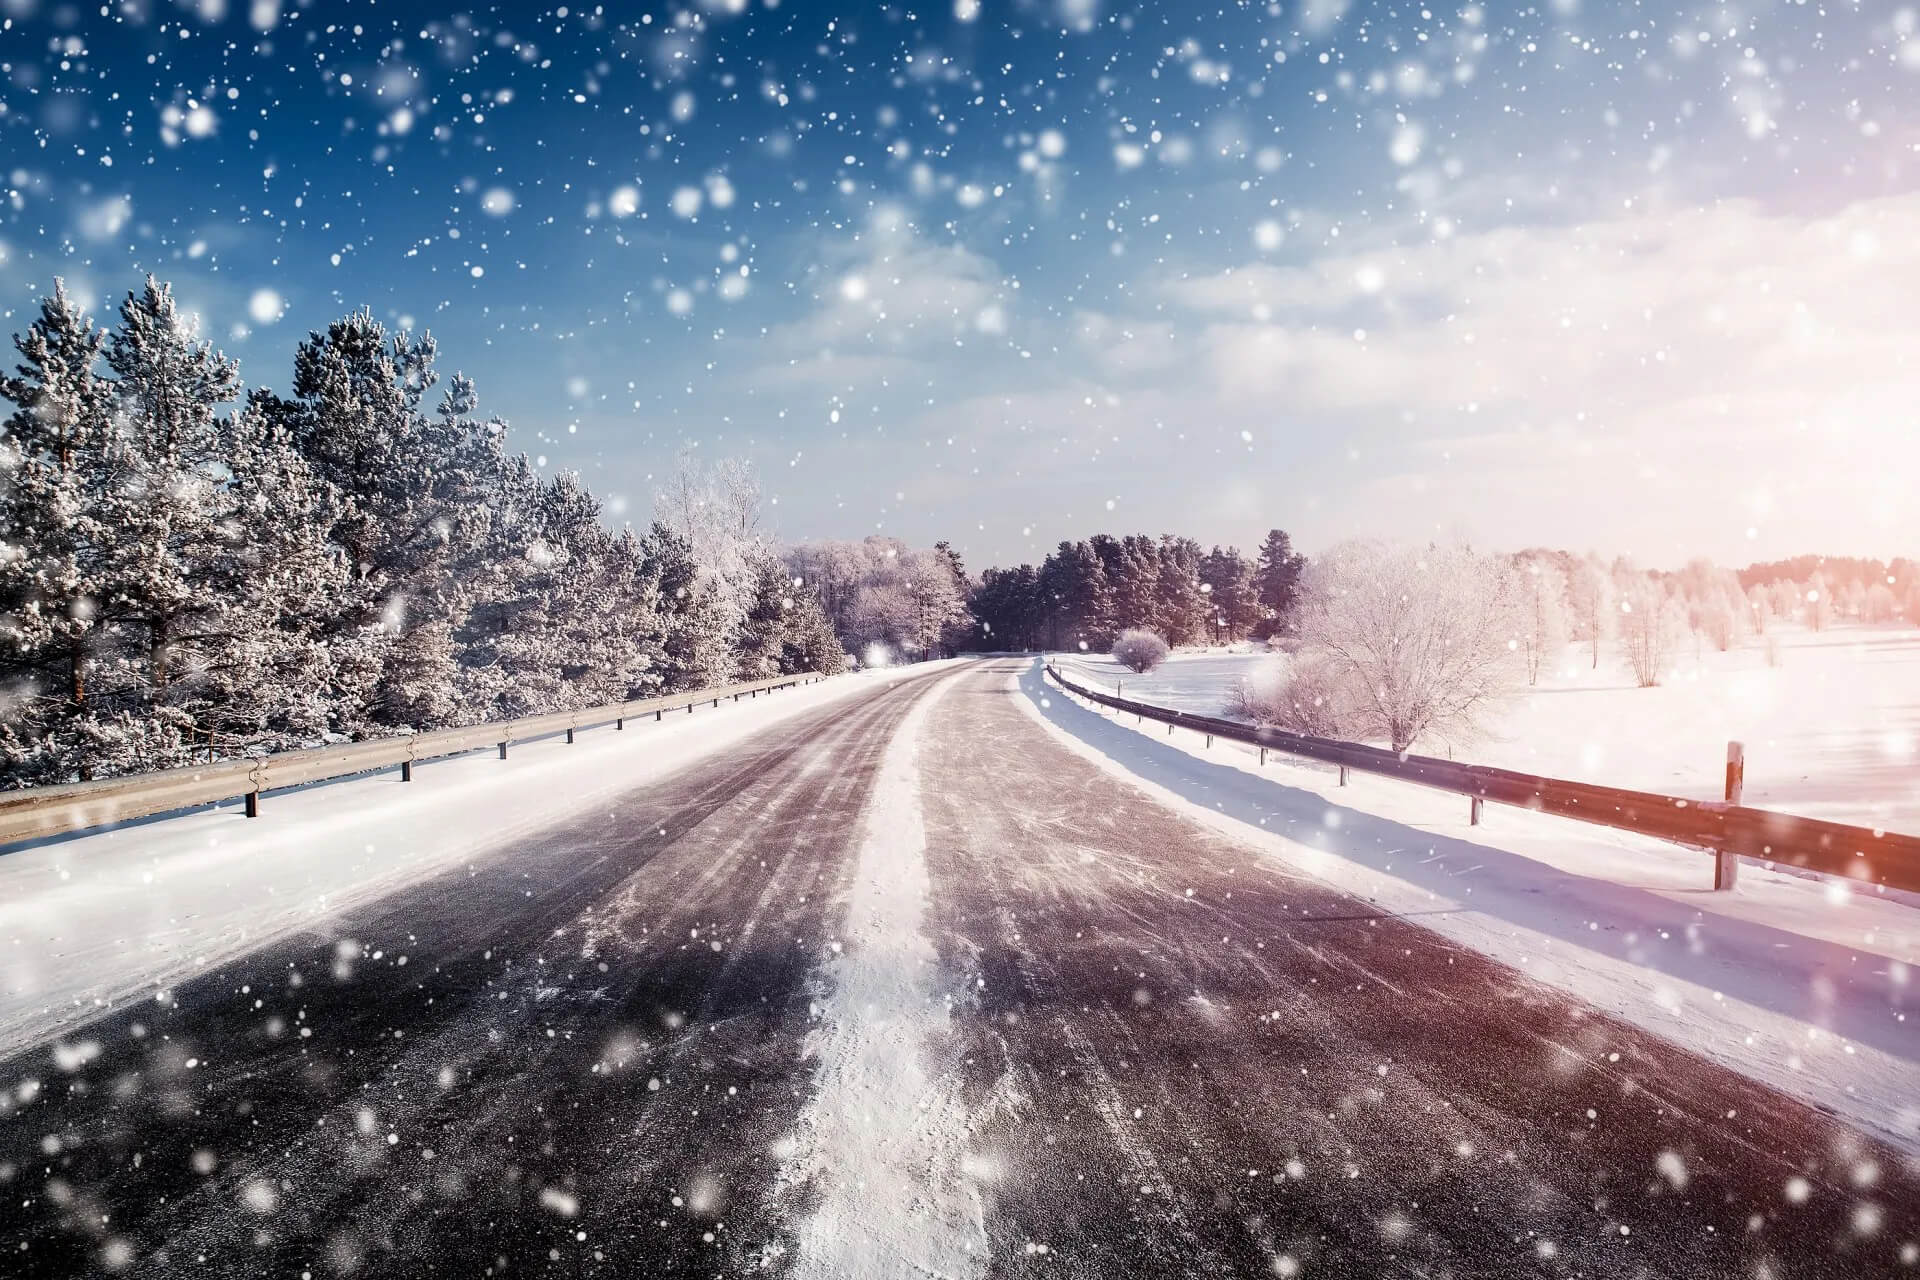 How Do Personal Injuries Happen In Winter Driving Accidents?